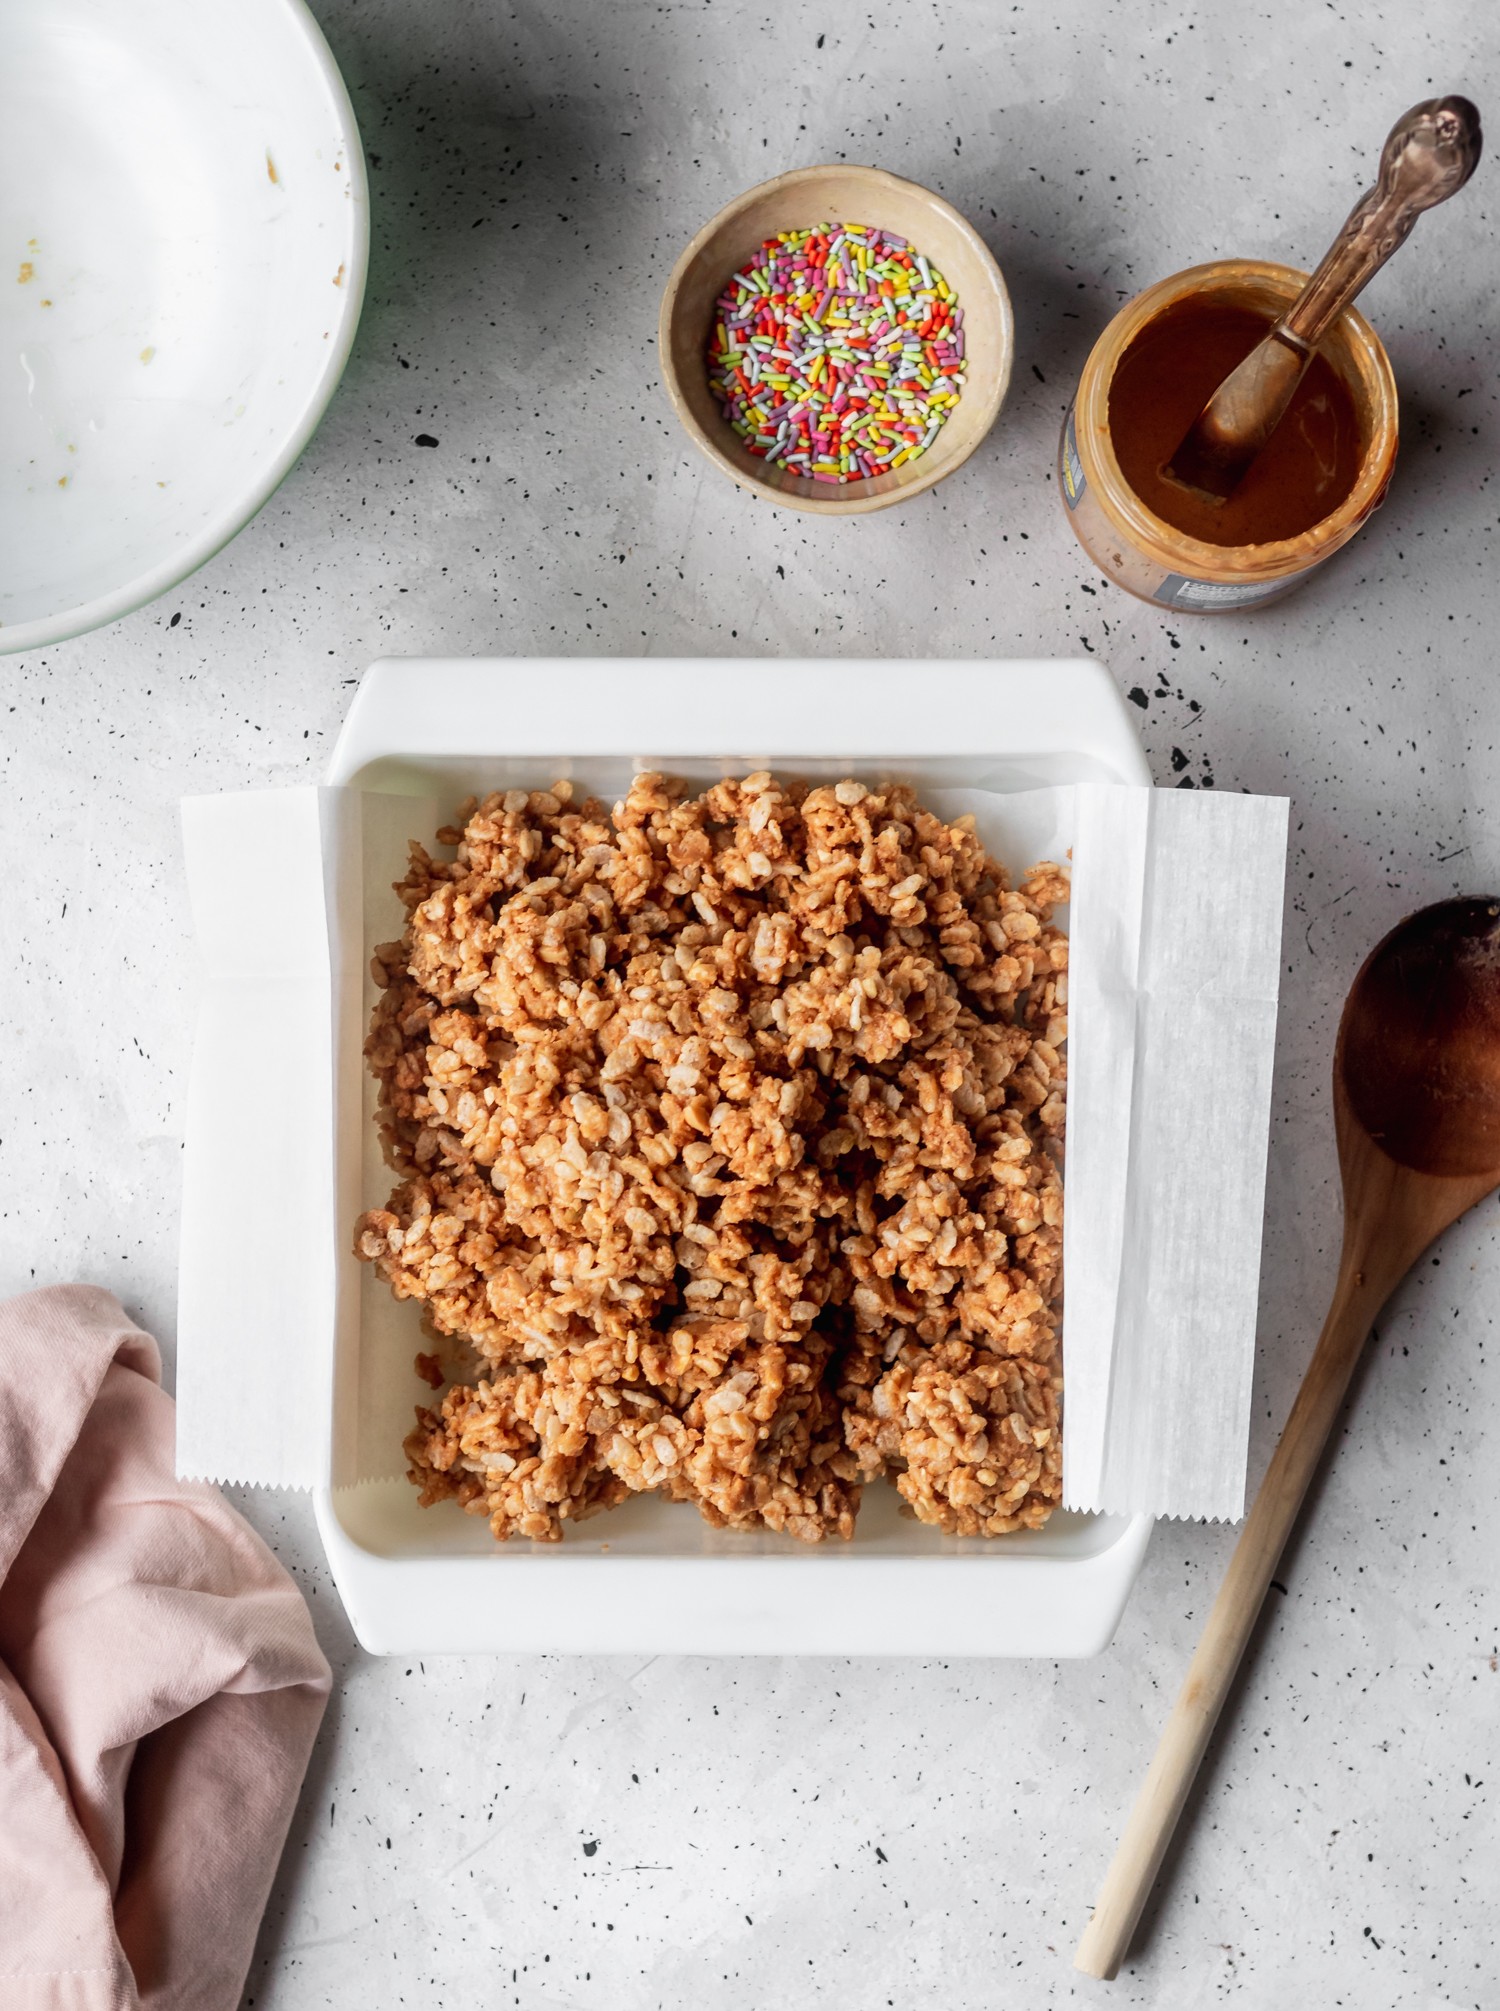 A white baking dish filled with nutty, crispy cereal dessert on a grey background.